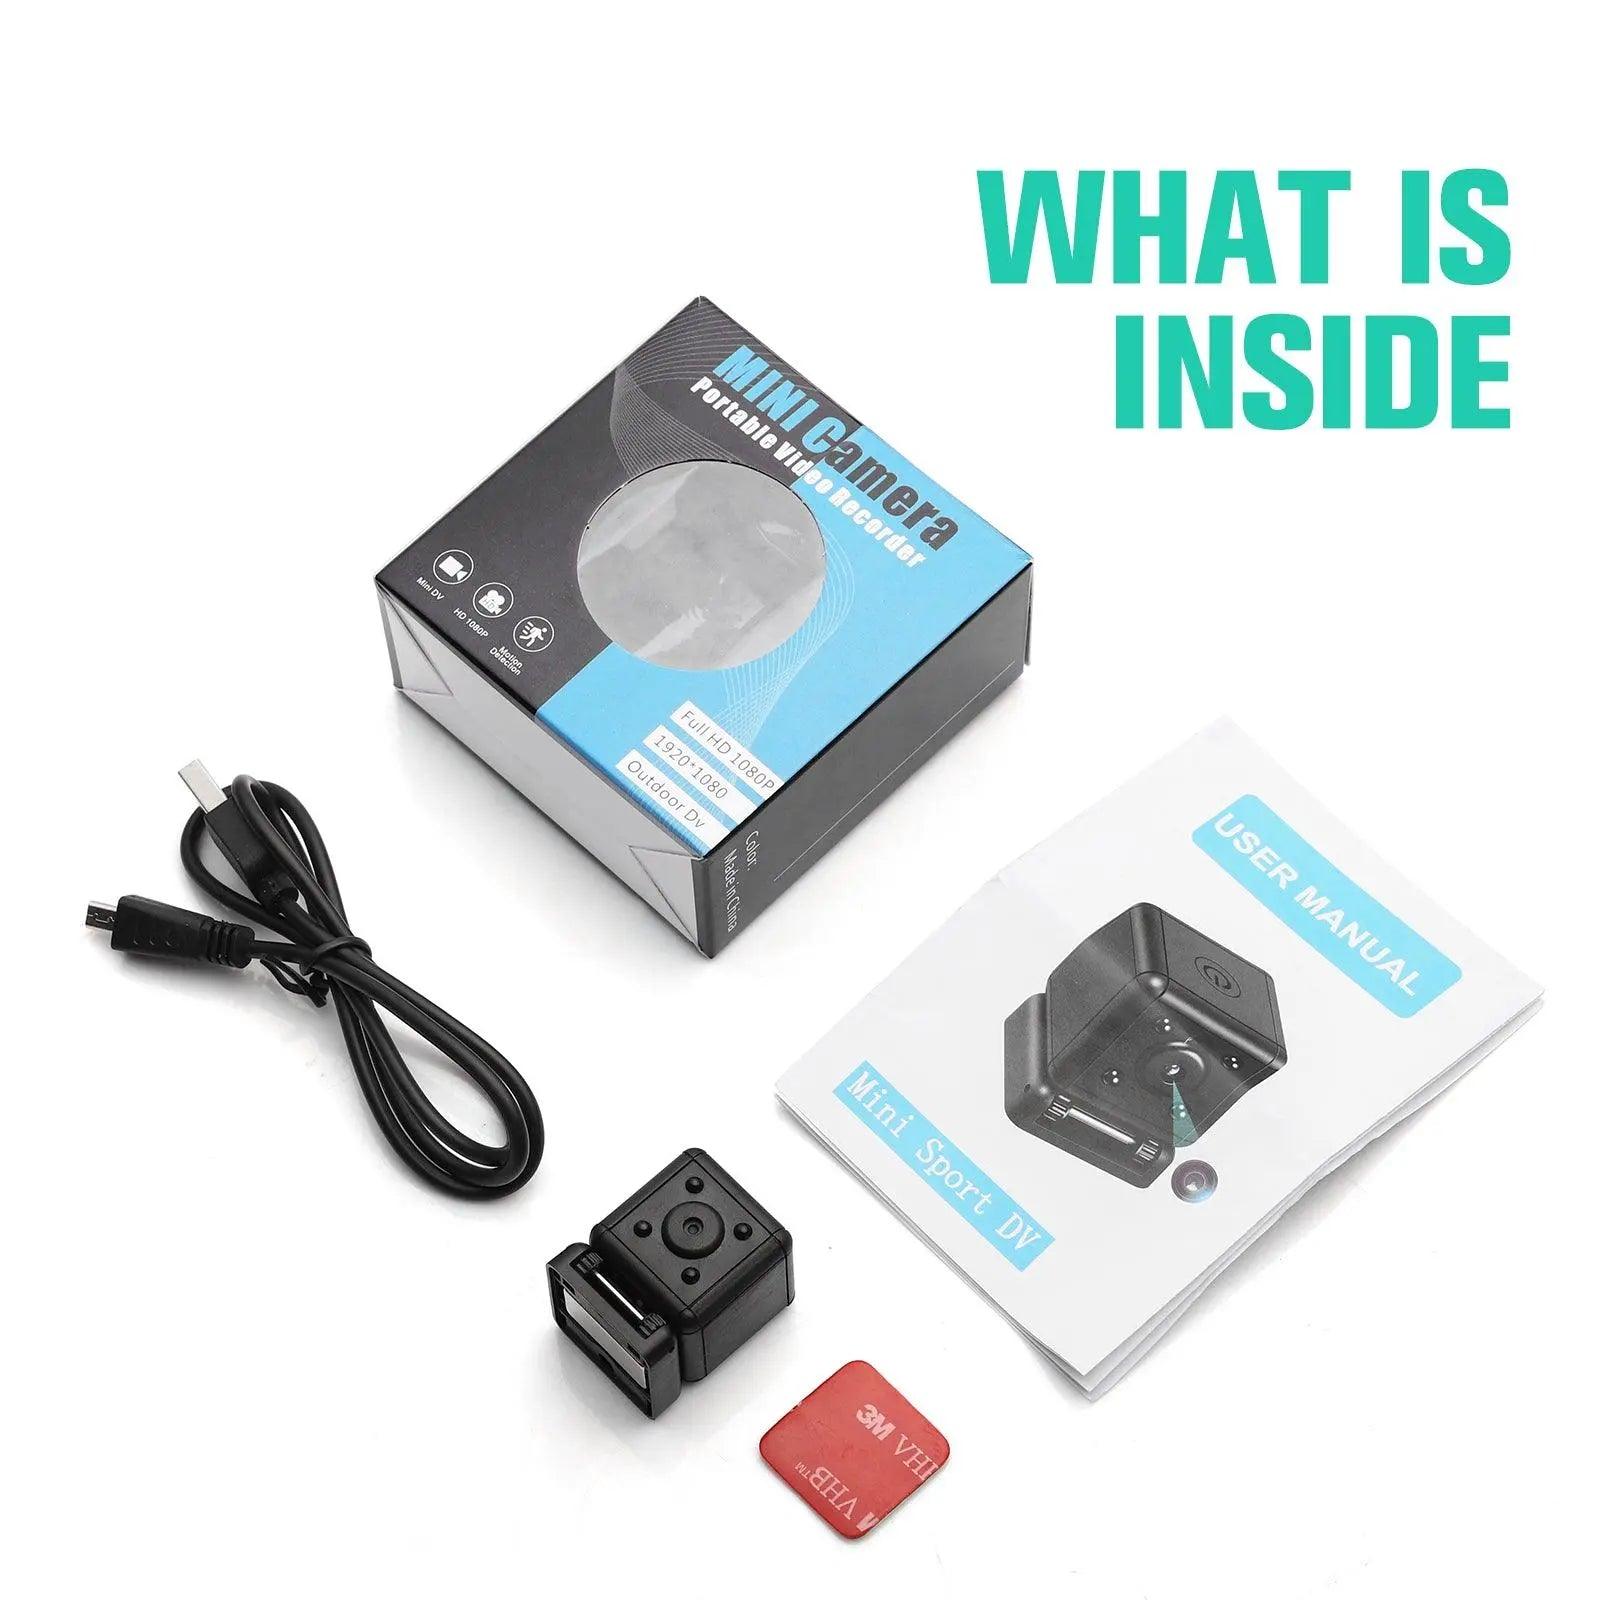 Hd 1080p Portable Mini Camera With Night Vision And Motion